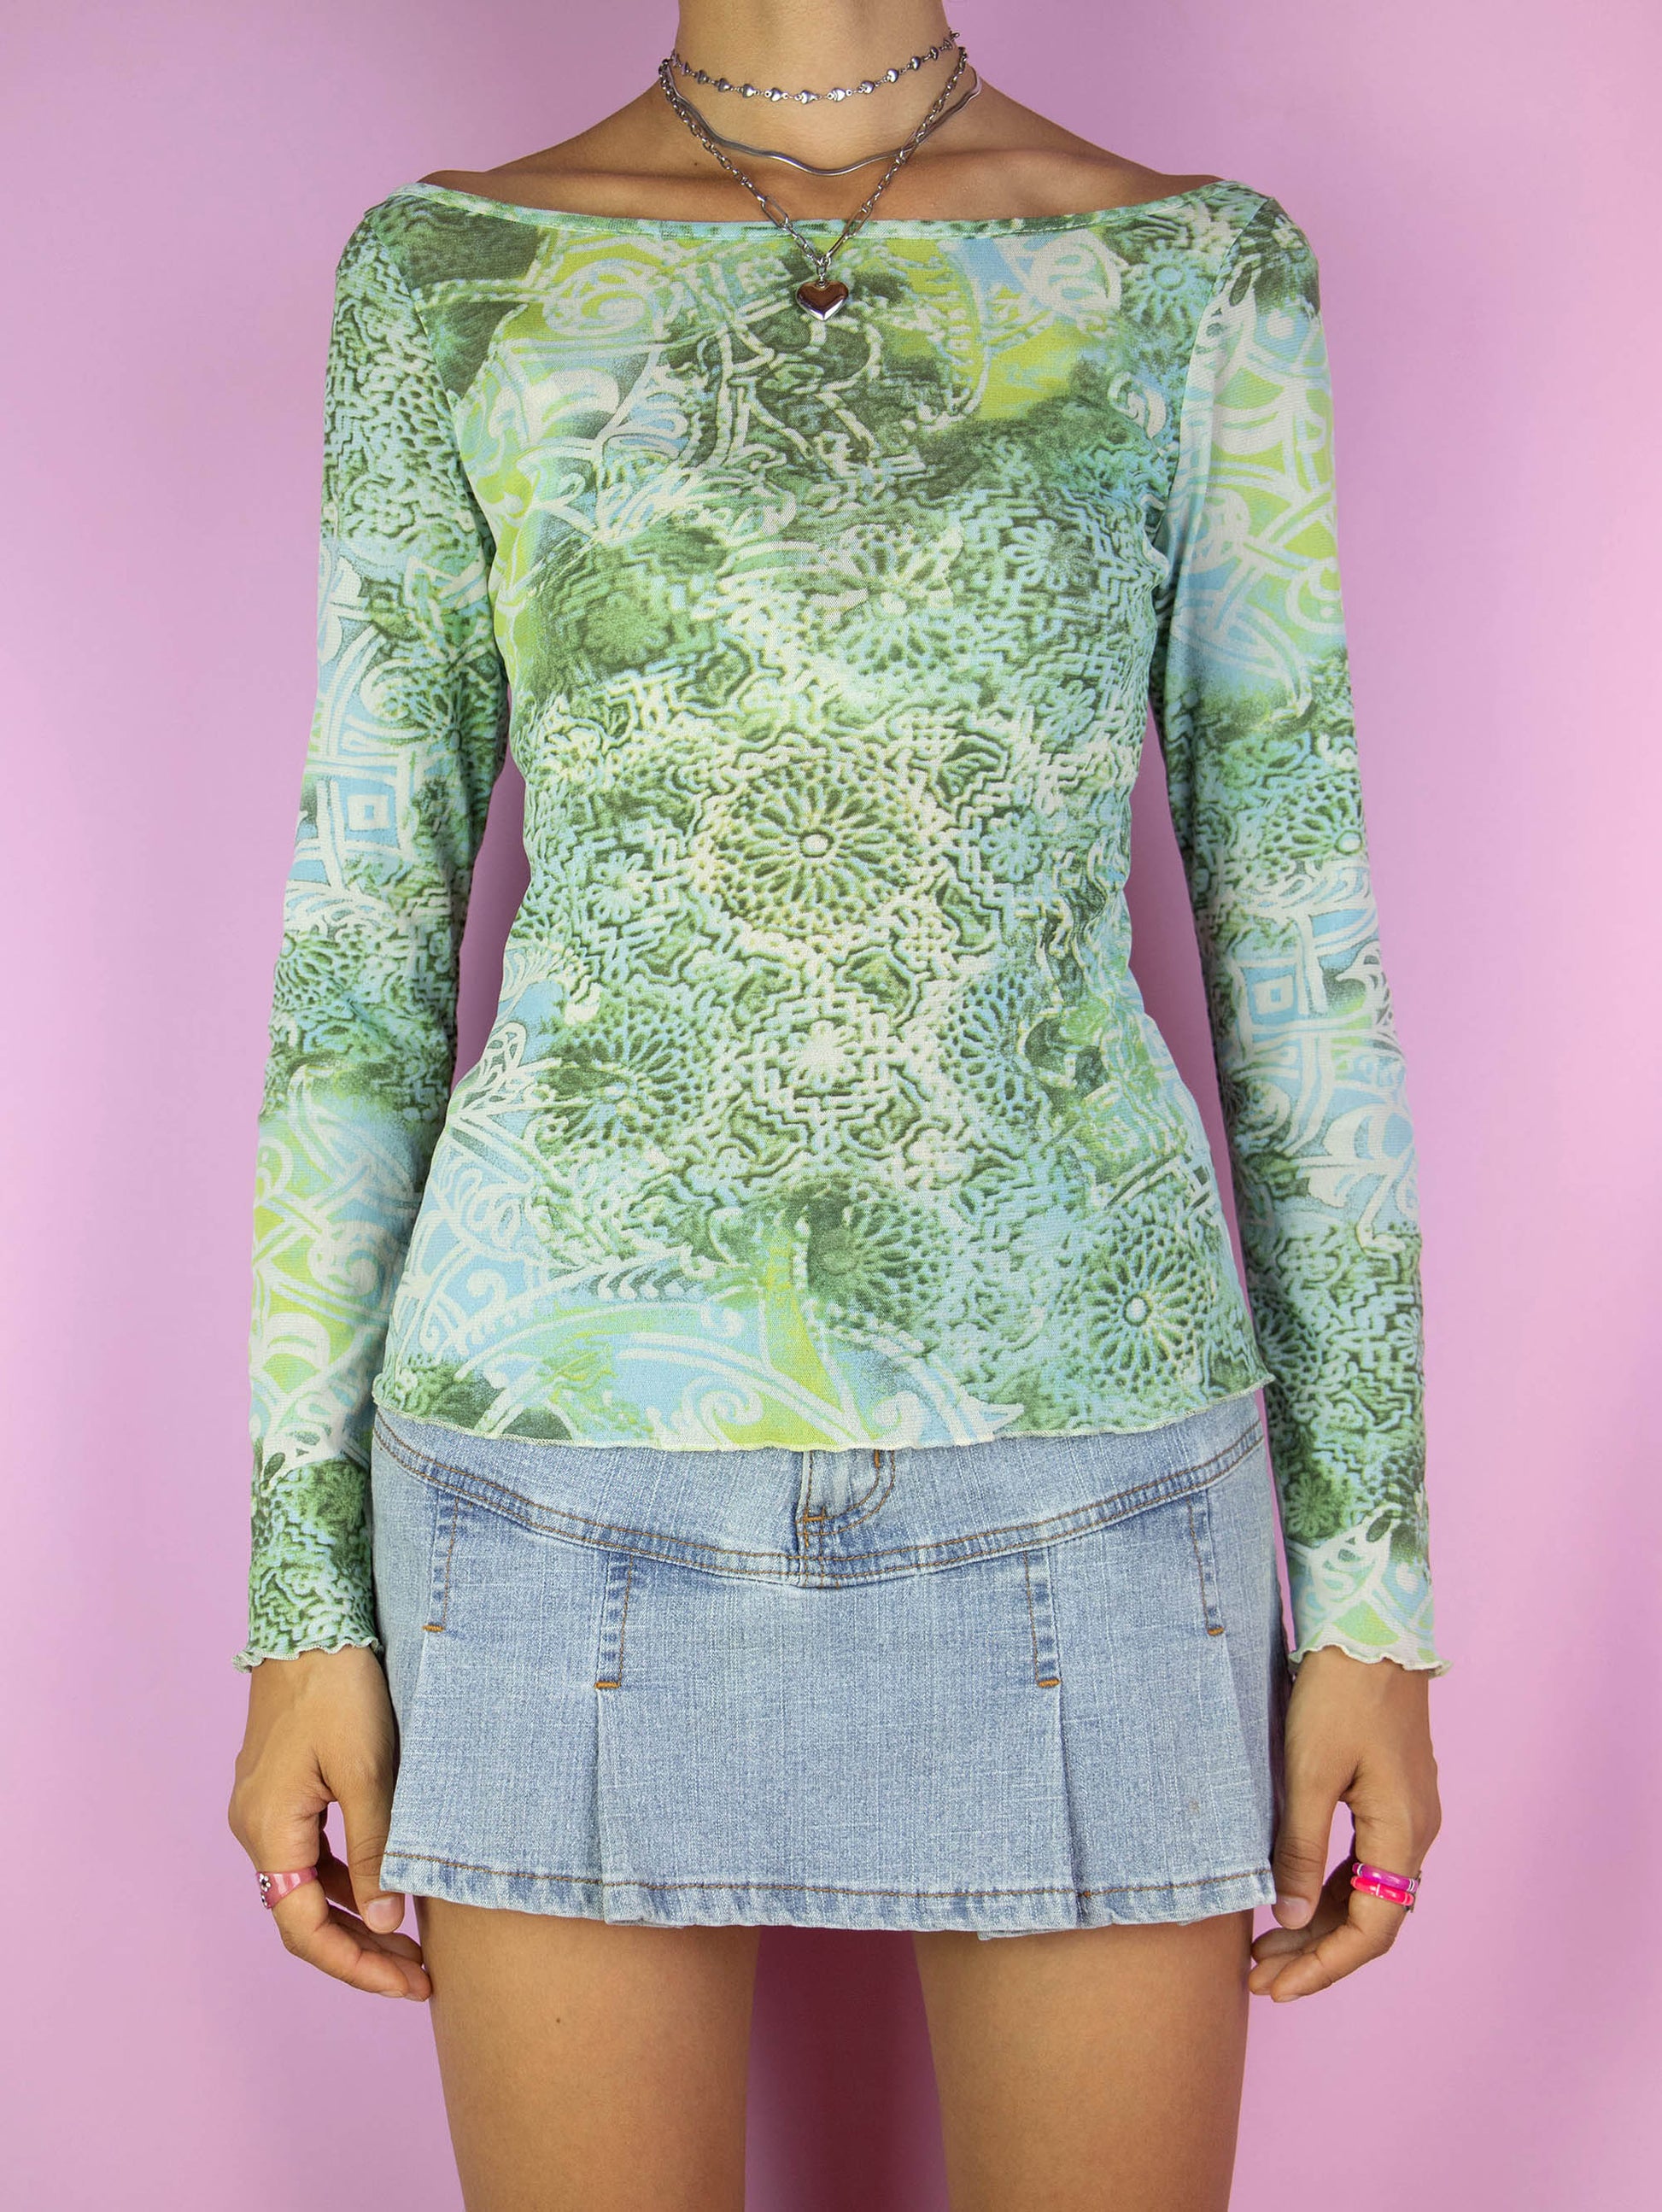  The Vintage Y2K Green Abstract Mesh Top is a long-sleeve, abstract light green, blue, and beige semi-sheer mesh blouse. Lovely cyber grunge summer shirt from the 2000s. Ideal for festivals, raves, and clubbing.